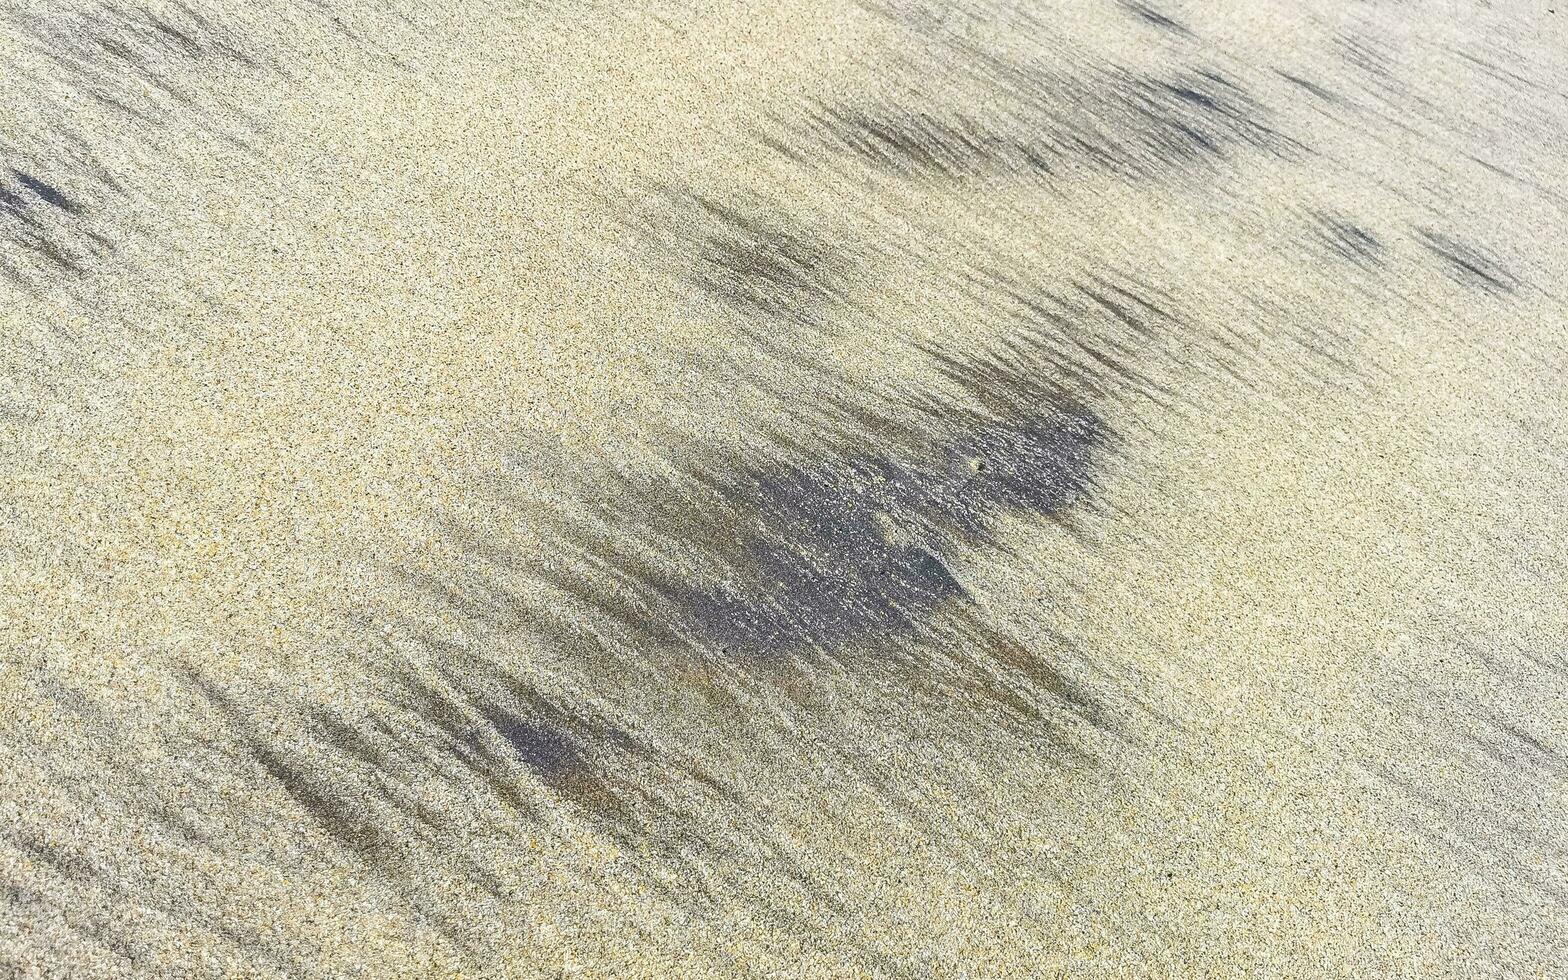 Wet beach sand water and waves texture and pattern in Mexico. photo